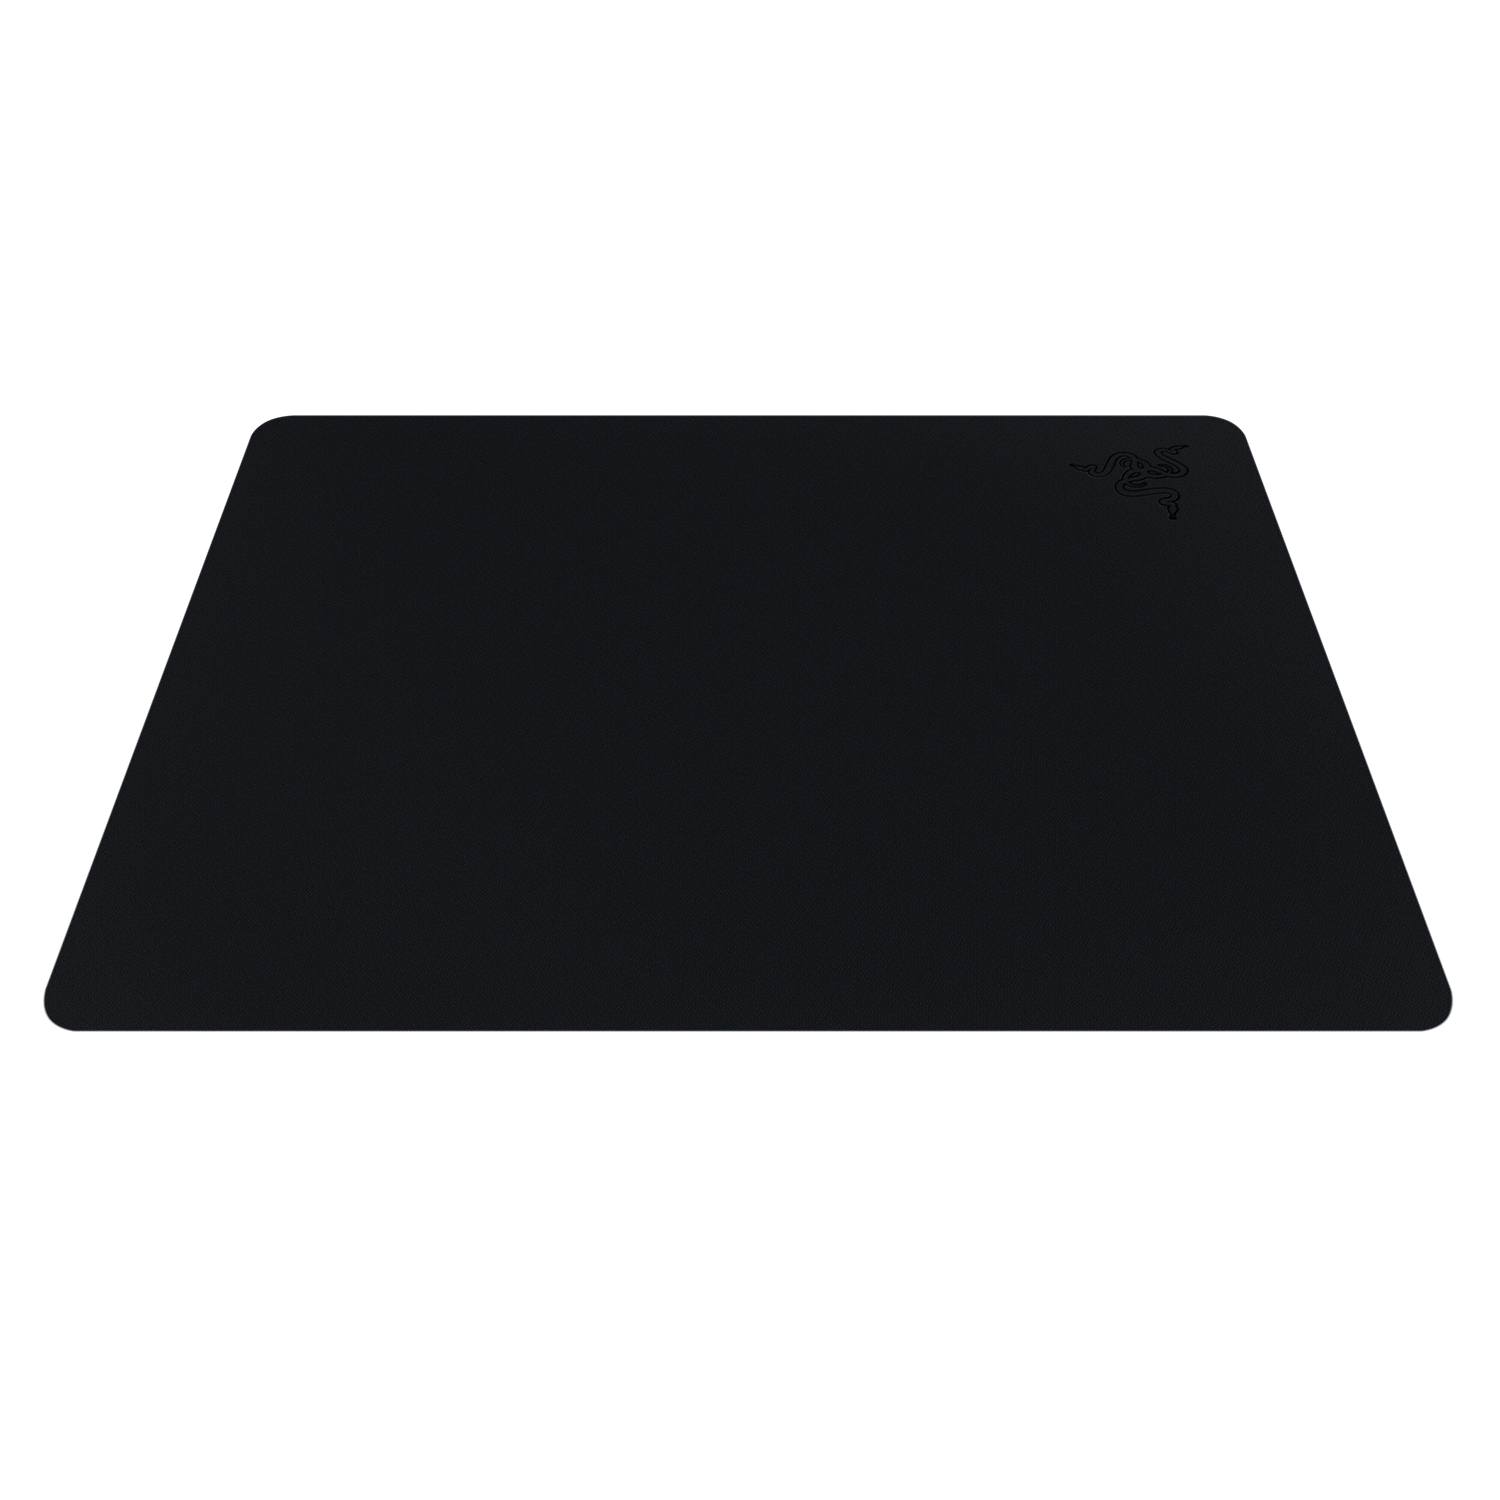 Razer Goliathus Mobile Stealth Edition Gaming Mouse Pad Black  RZ02-01820500-R3U1 - Best Buy